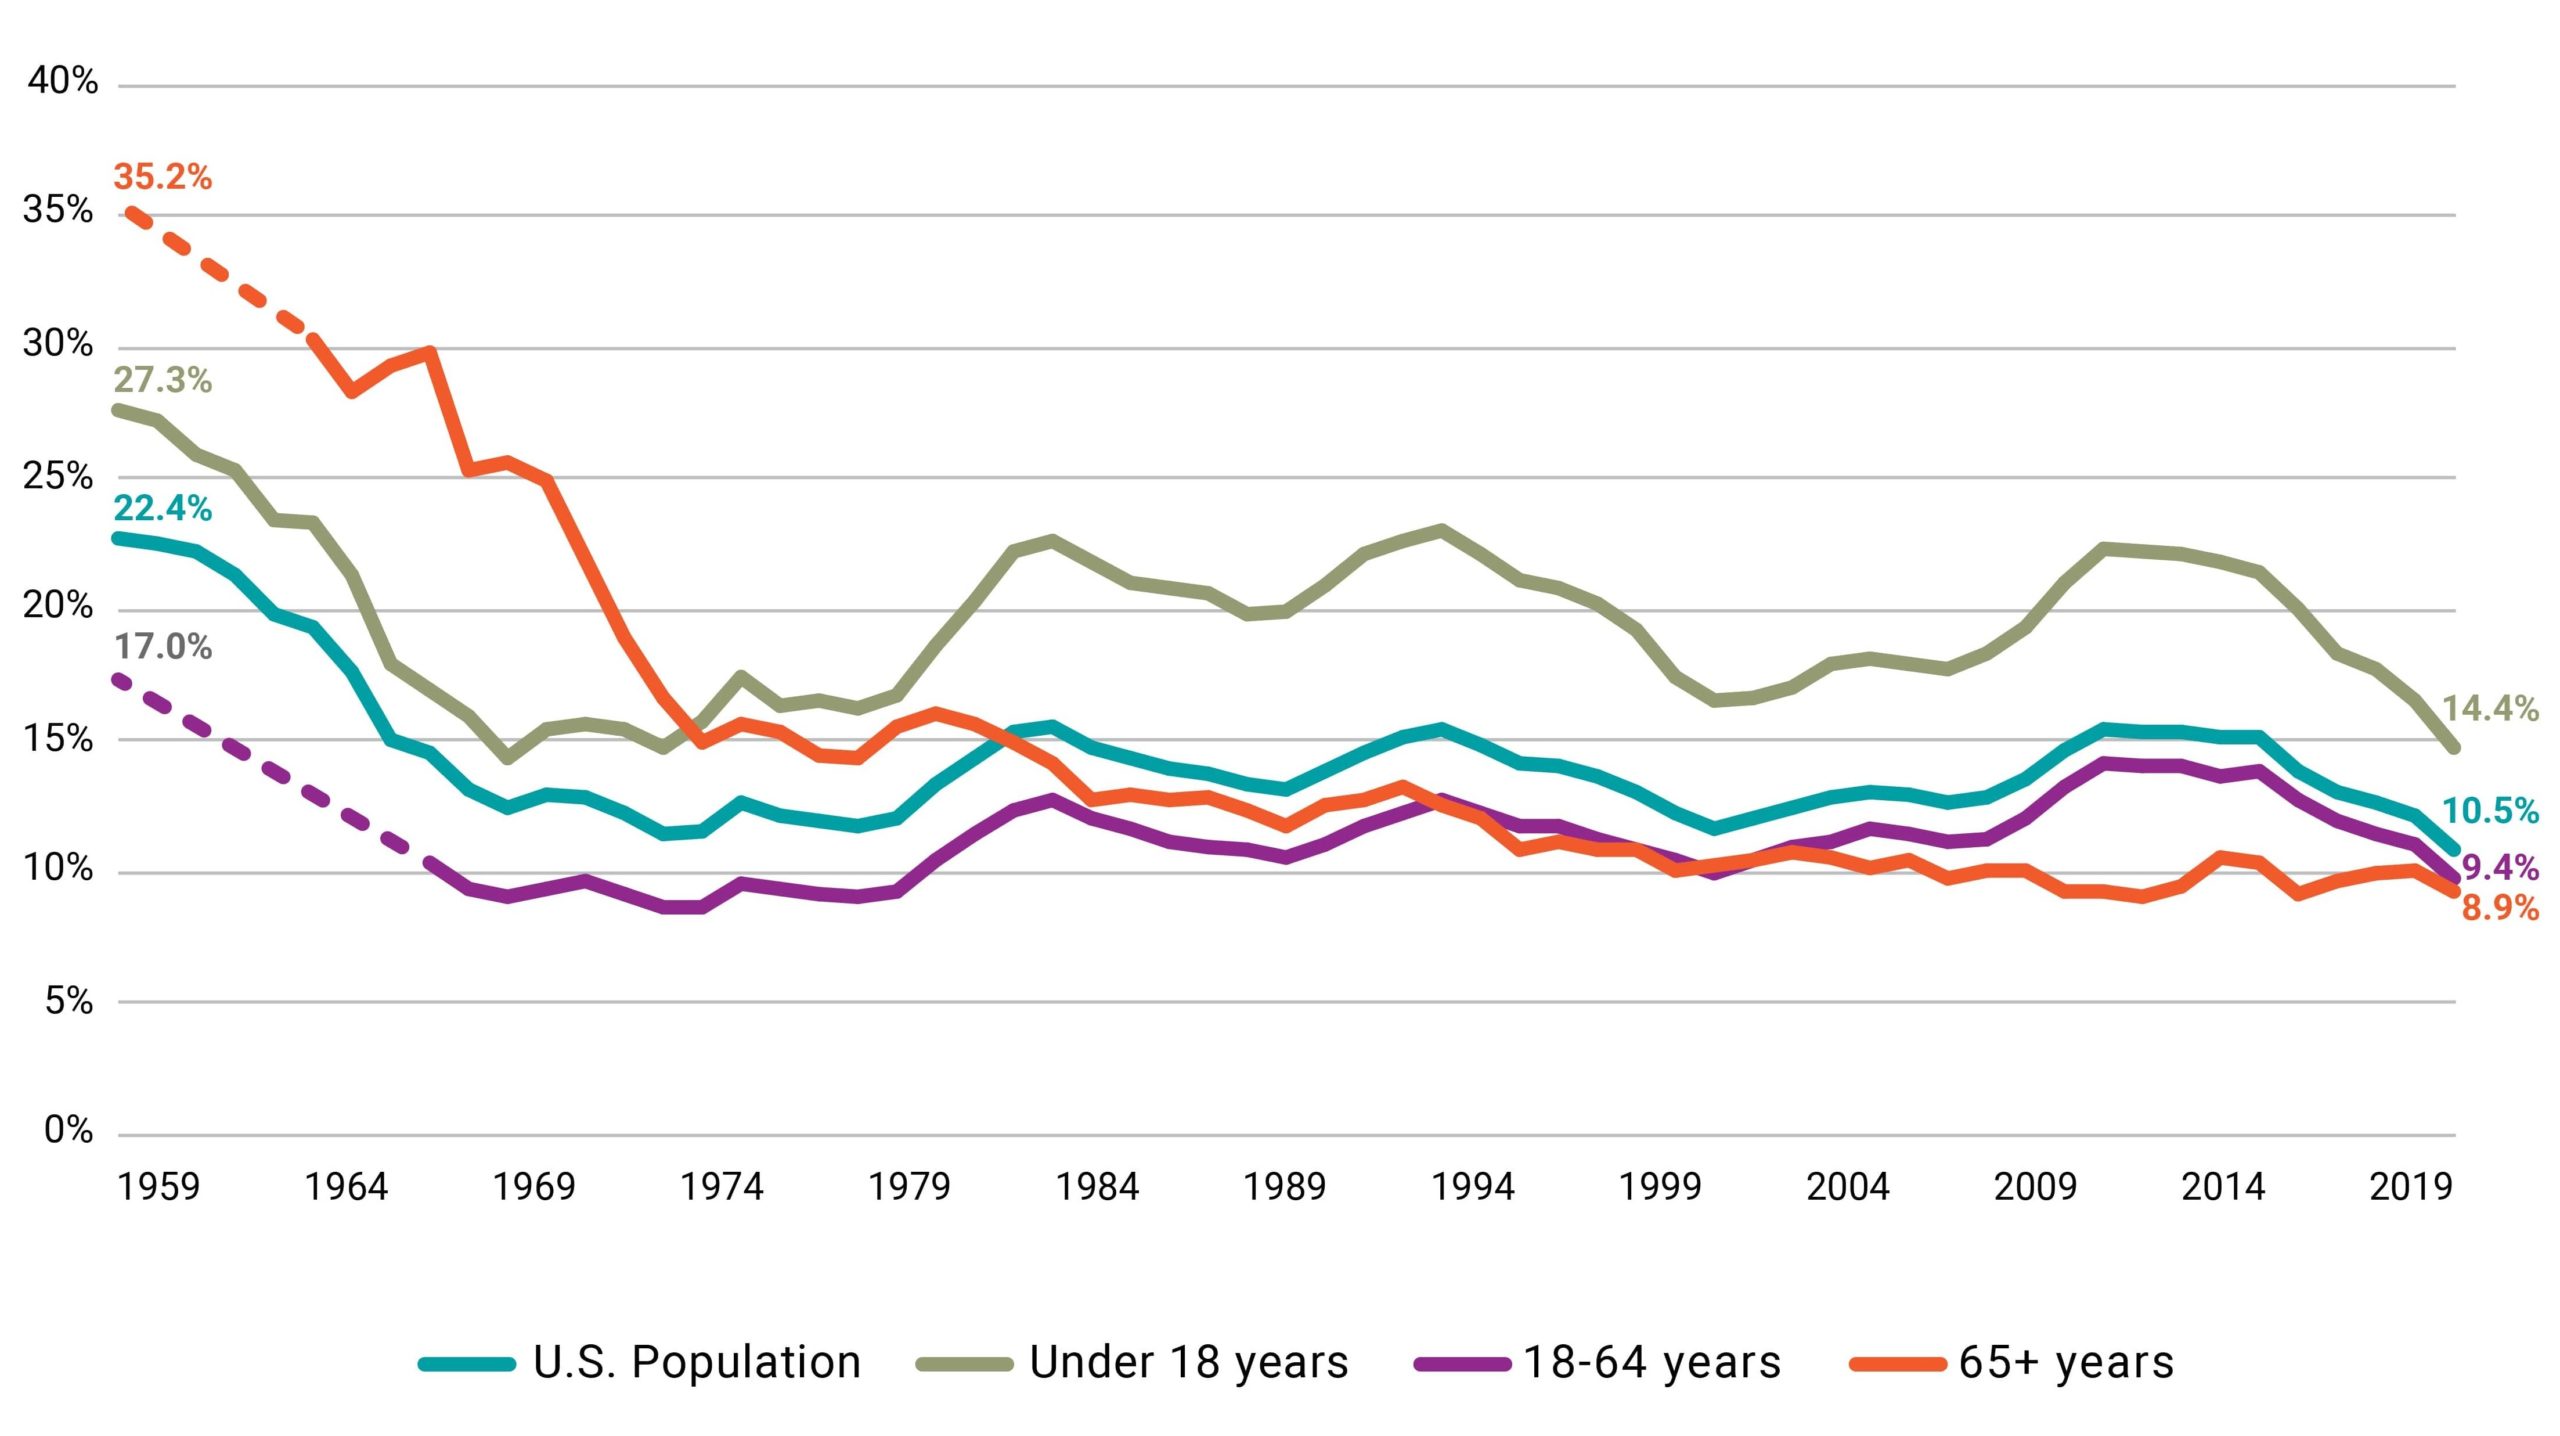 Figure 1. U.S. Official Poverty Rate, Total and by Age Group, 1959-2019